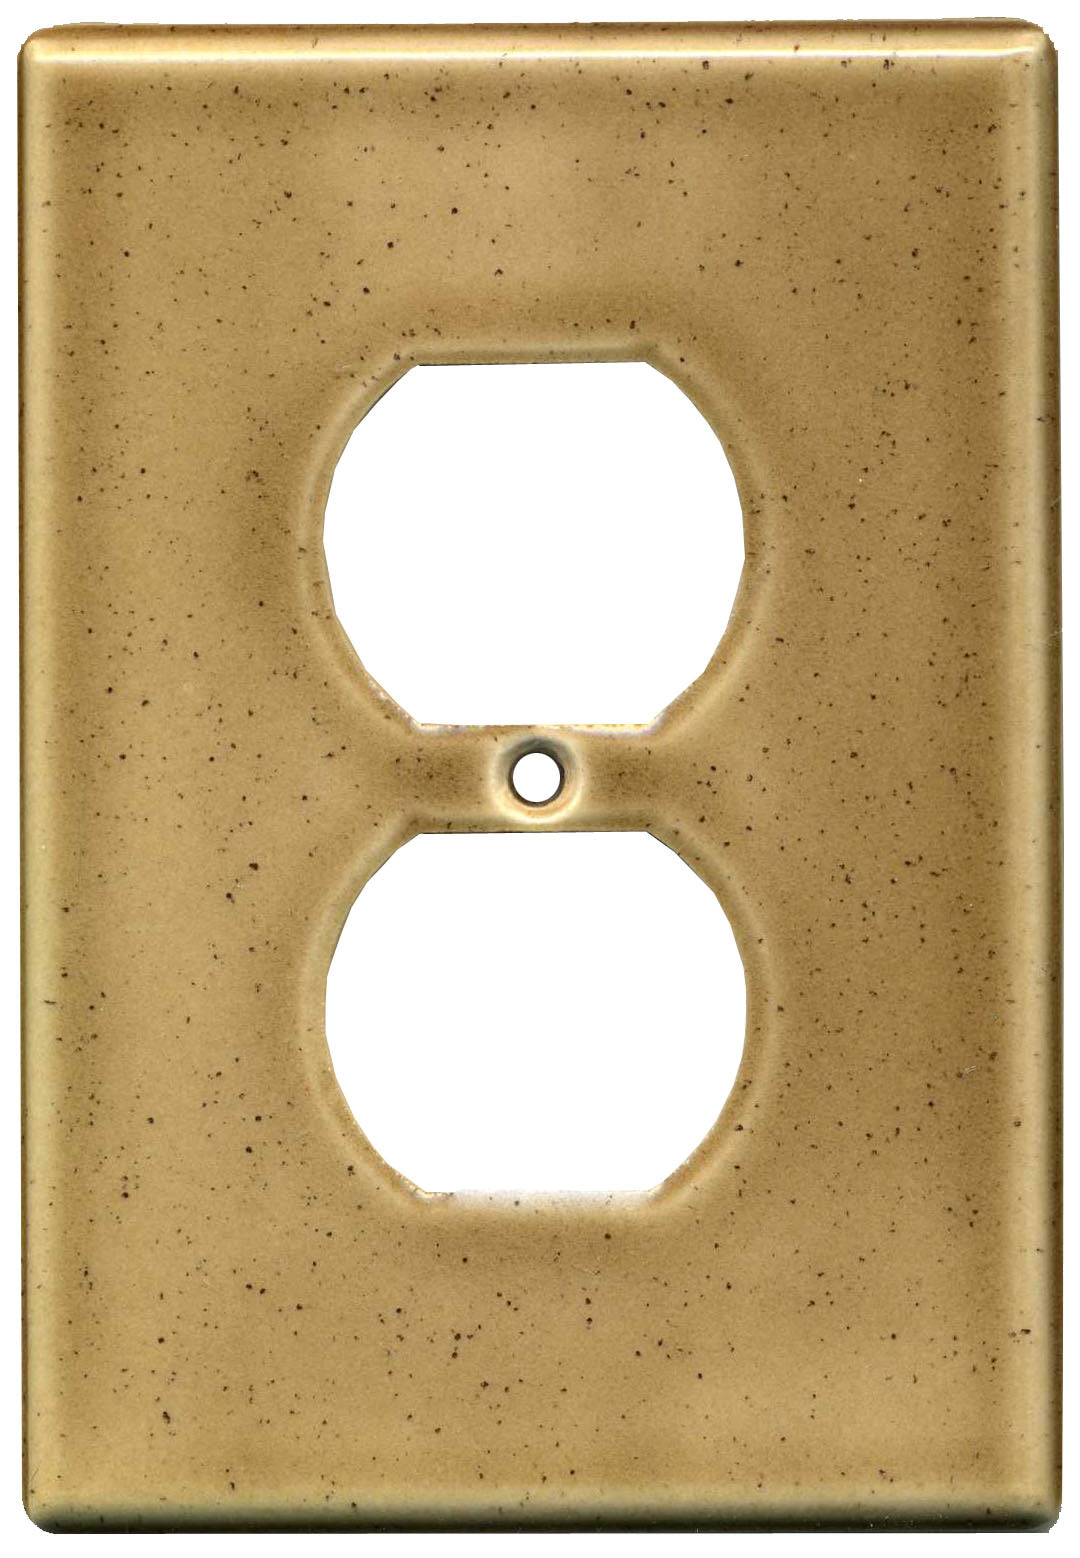 ash single outlet ceramic switch plate